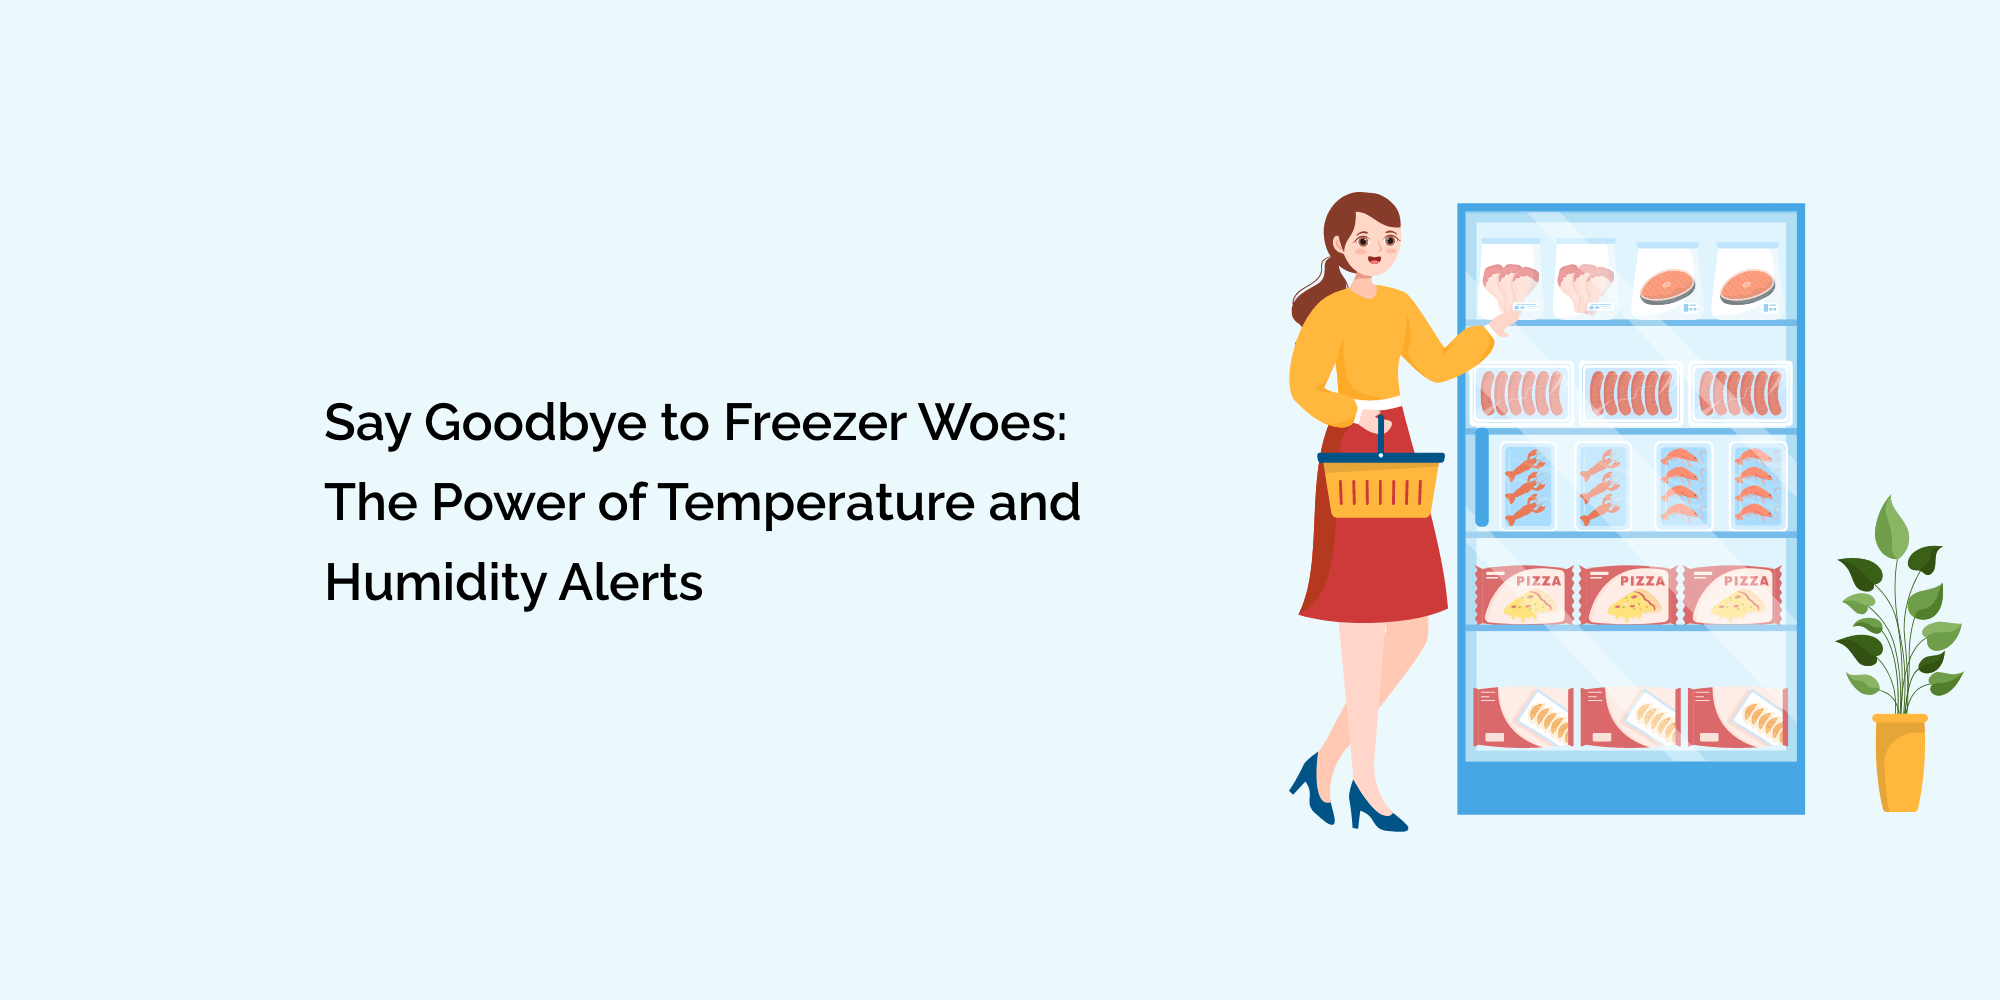 Say Goodbye to Freezer Woes: The Power of Temperature and Humidity Alerts